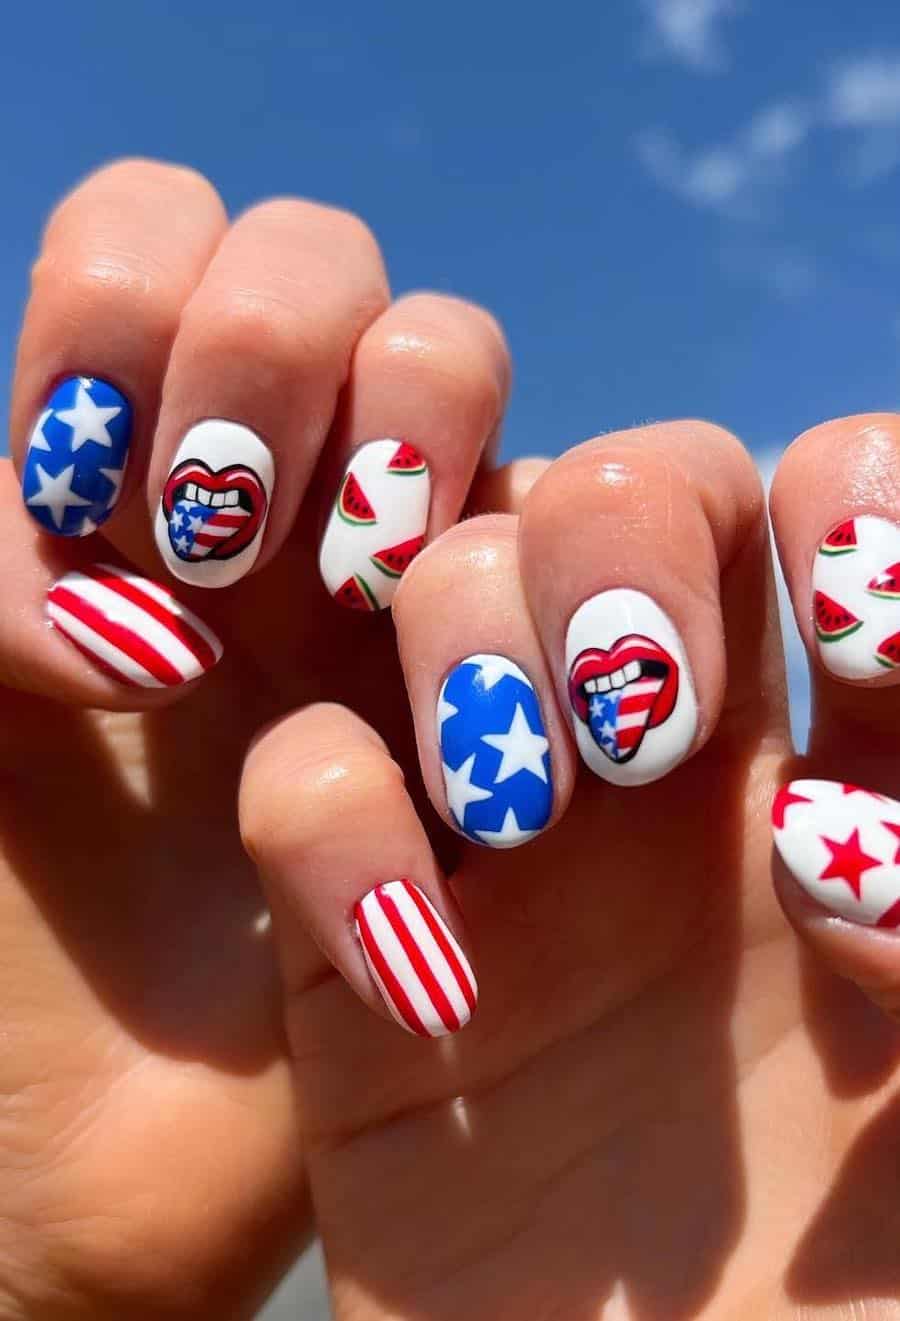 short round nails featuring fun fourth of july nail art including stars, stripes, watermelon, and a mouth with an American flag tongue sticking out